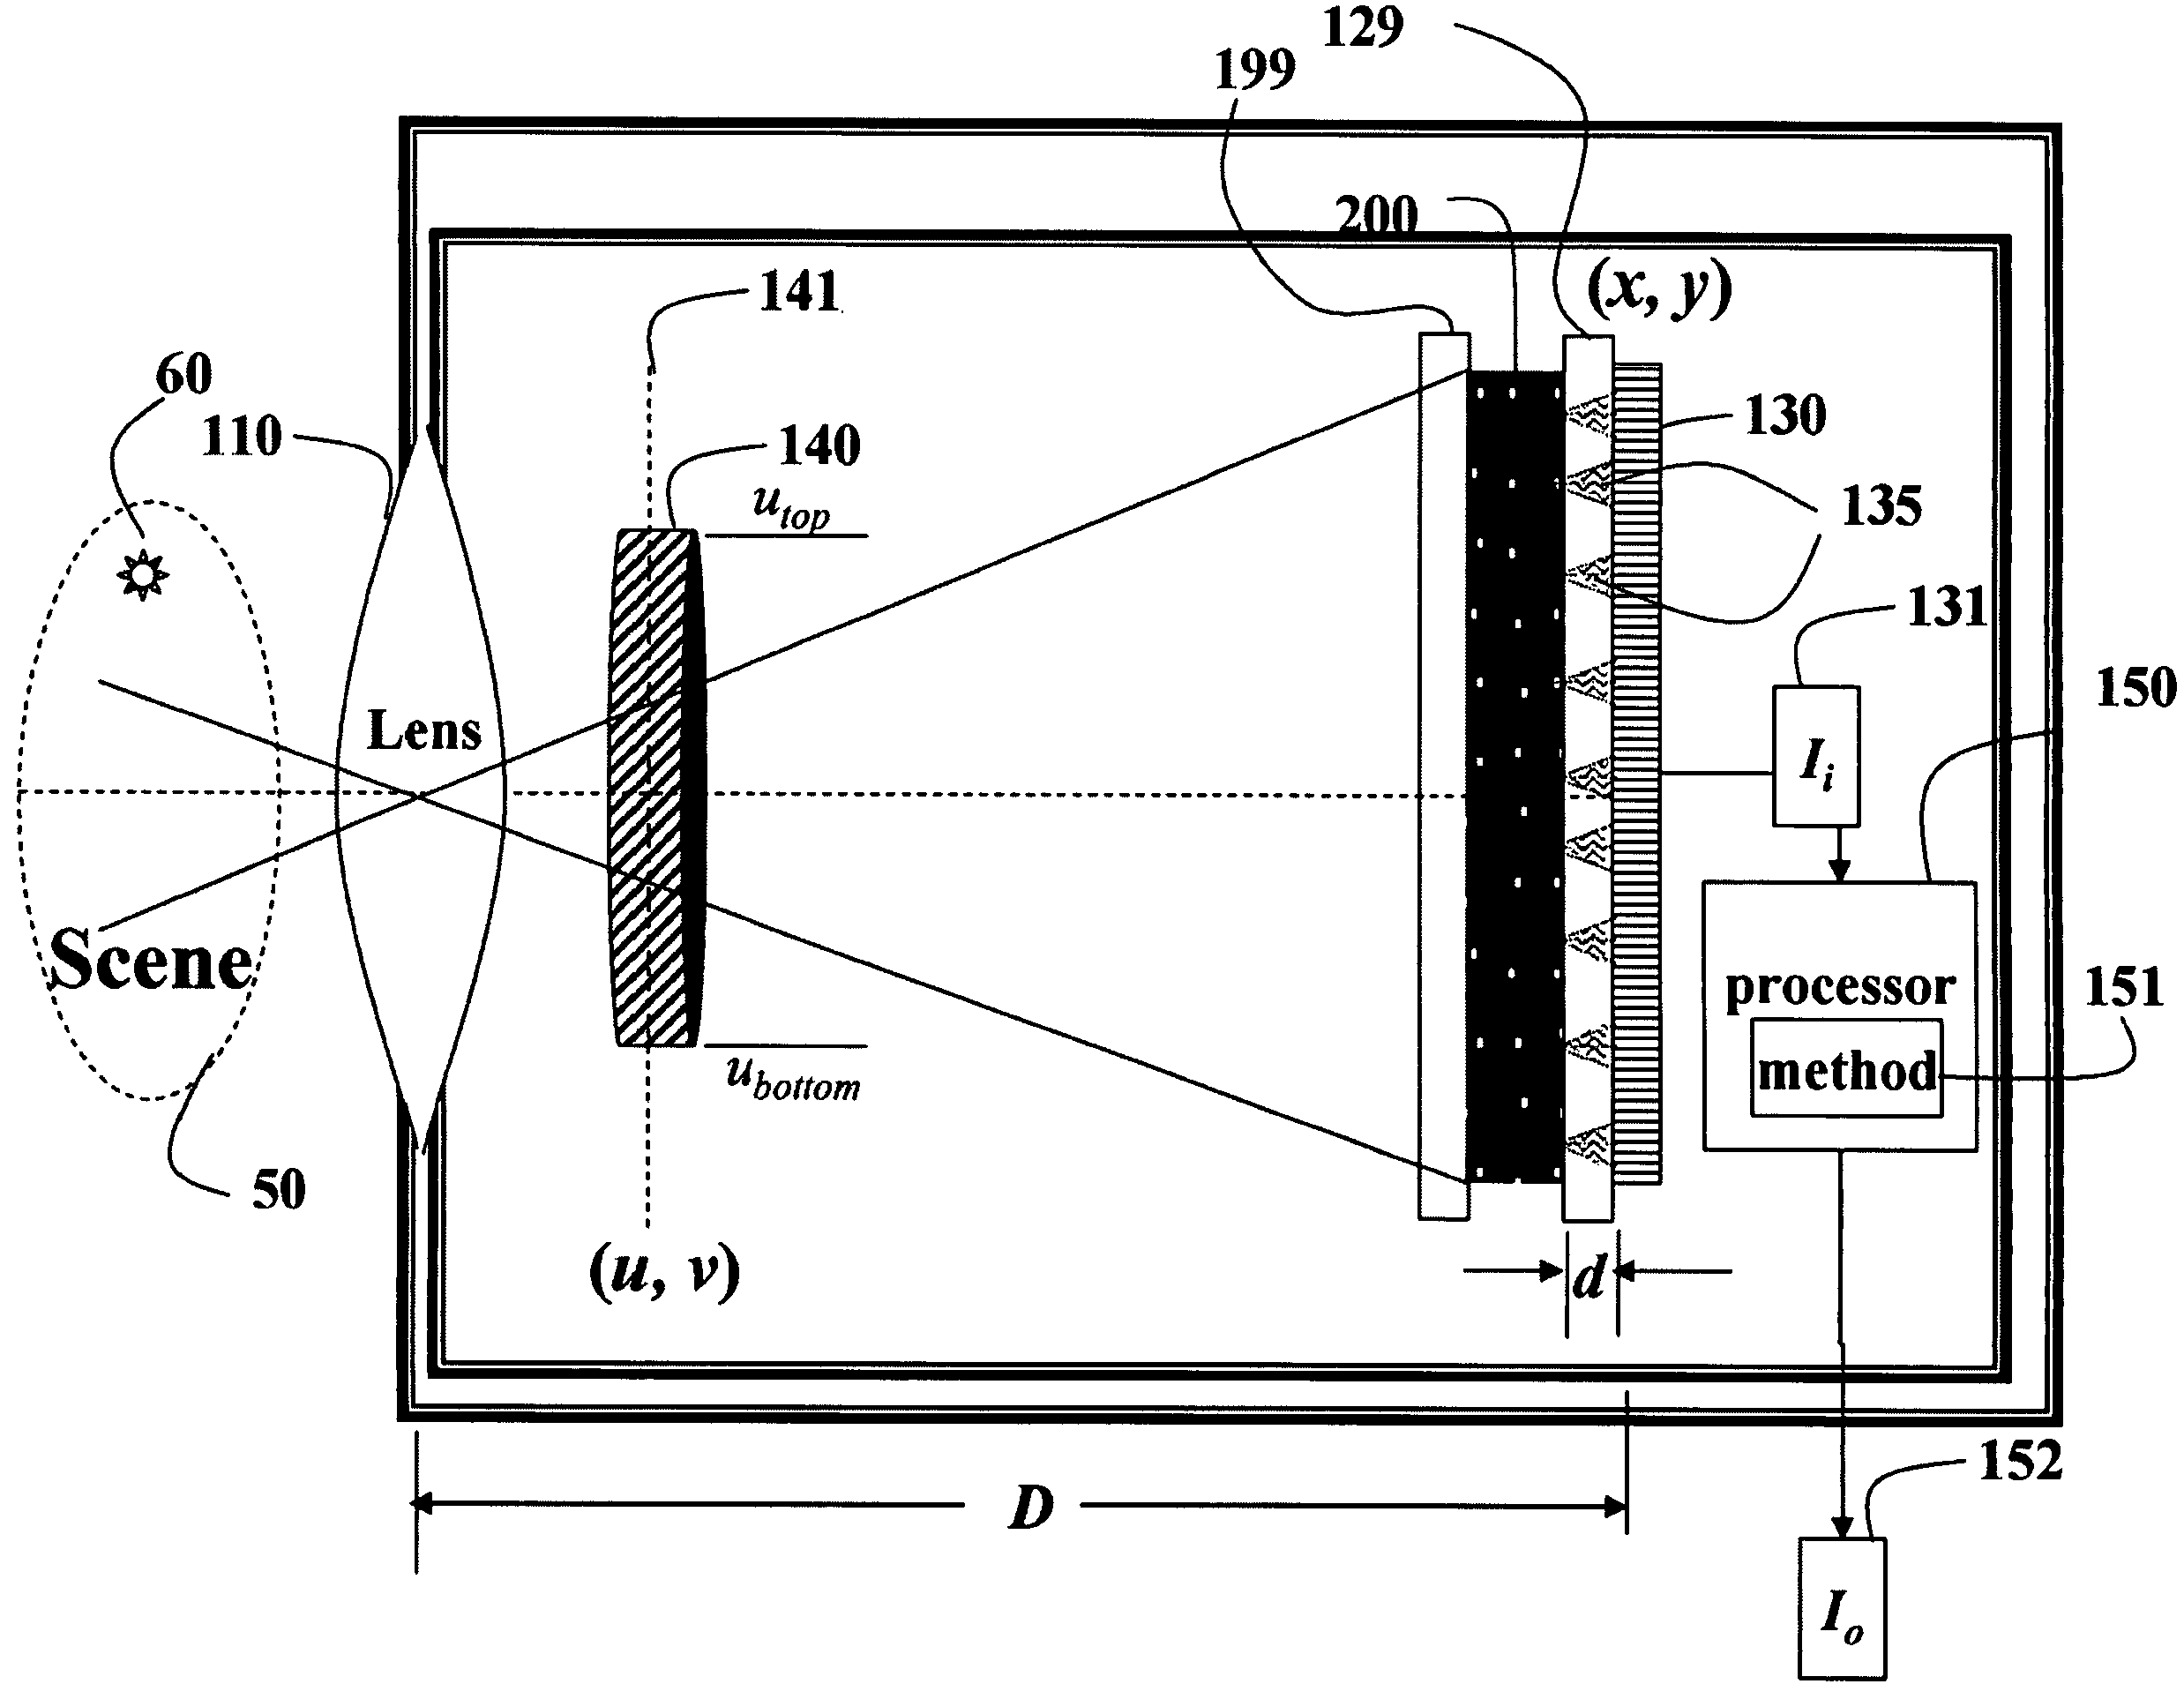 Apparatus and method for reducing glare in images